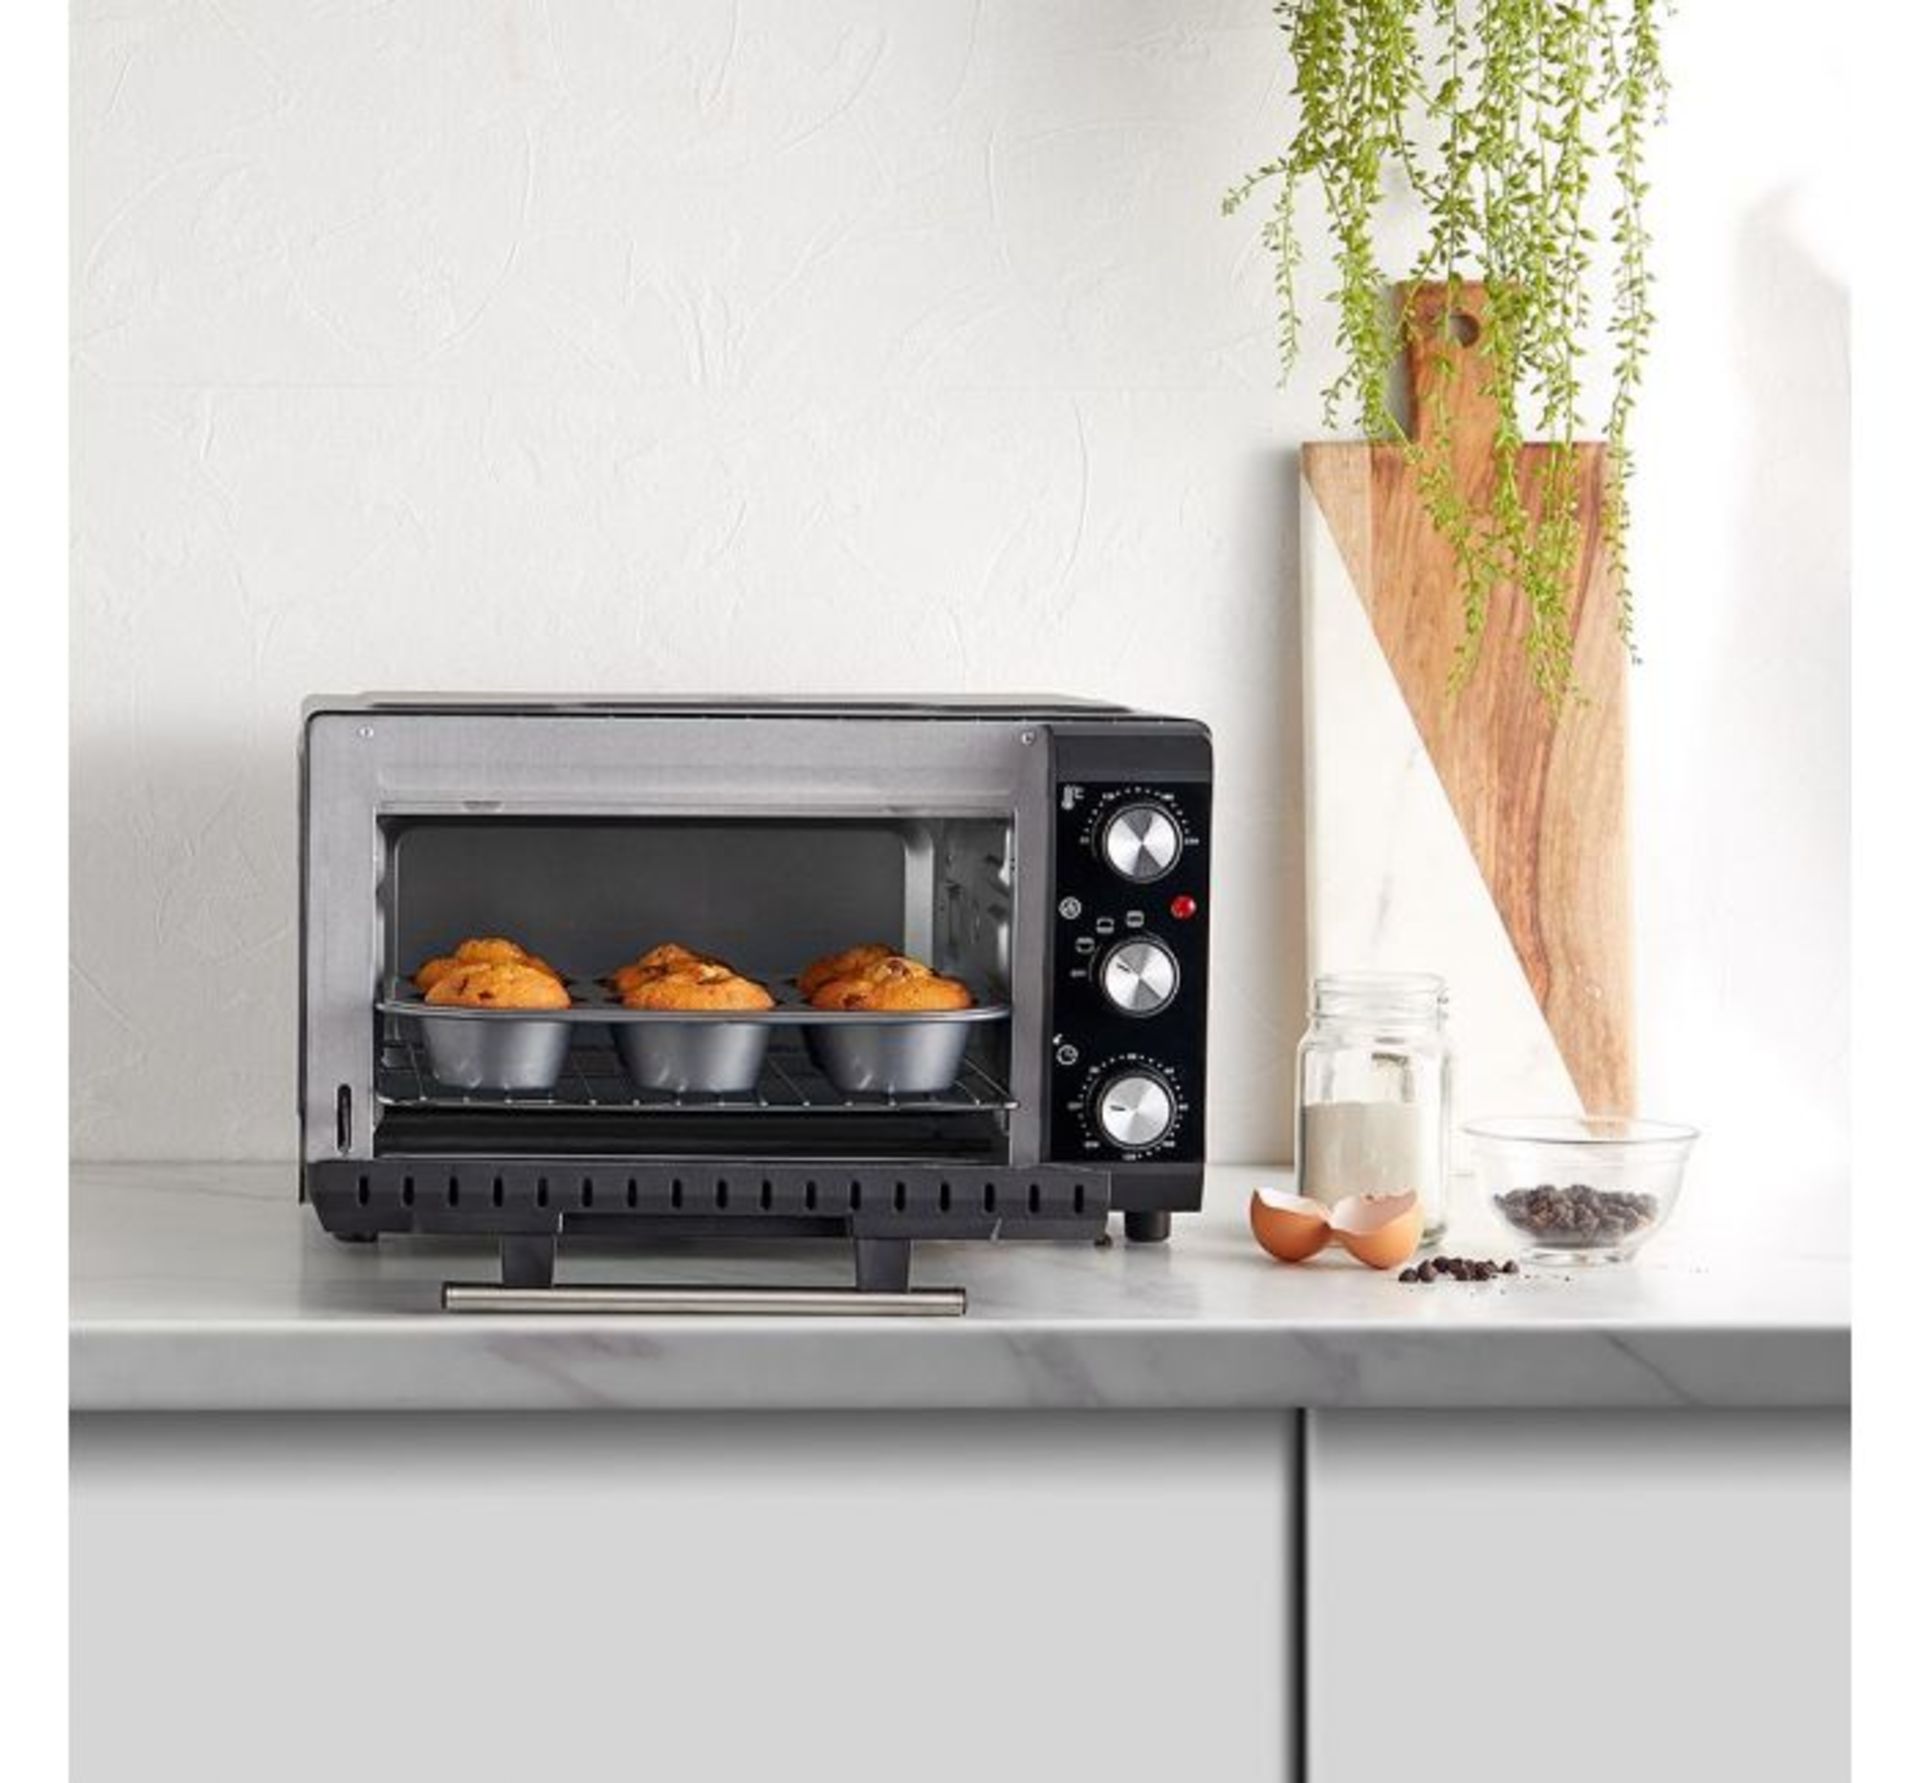 (JL56) 20L Mini Oven Make cooking easy in even the smallest spaces with this mini oven. 20L(JL56)(